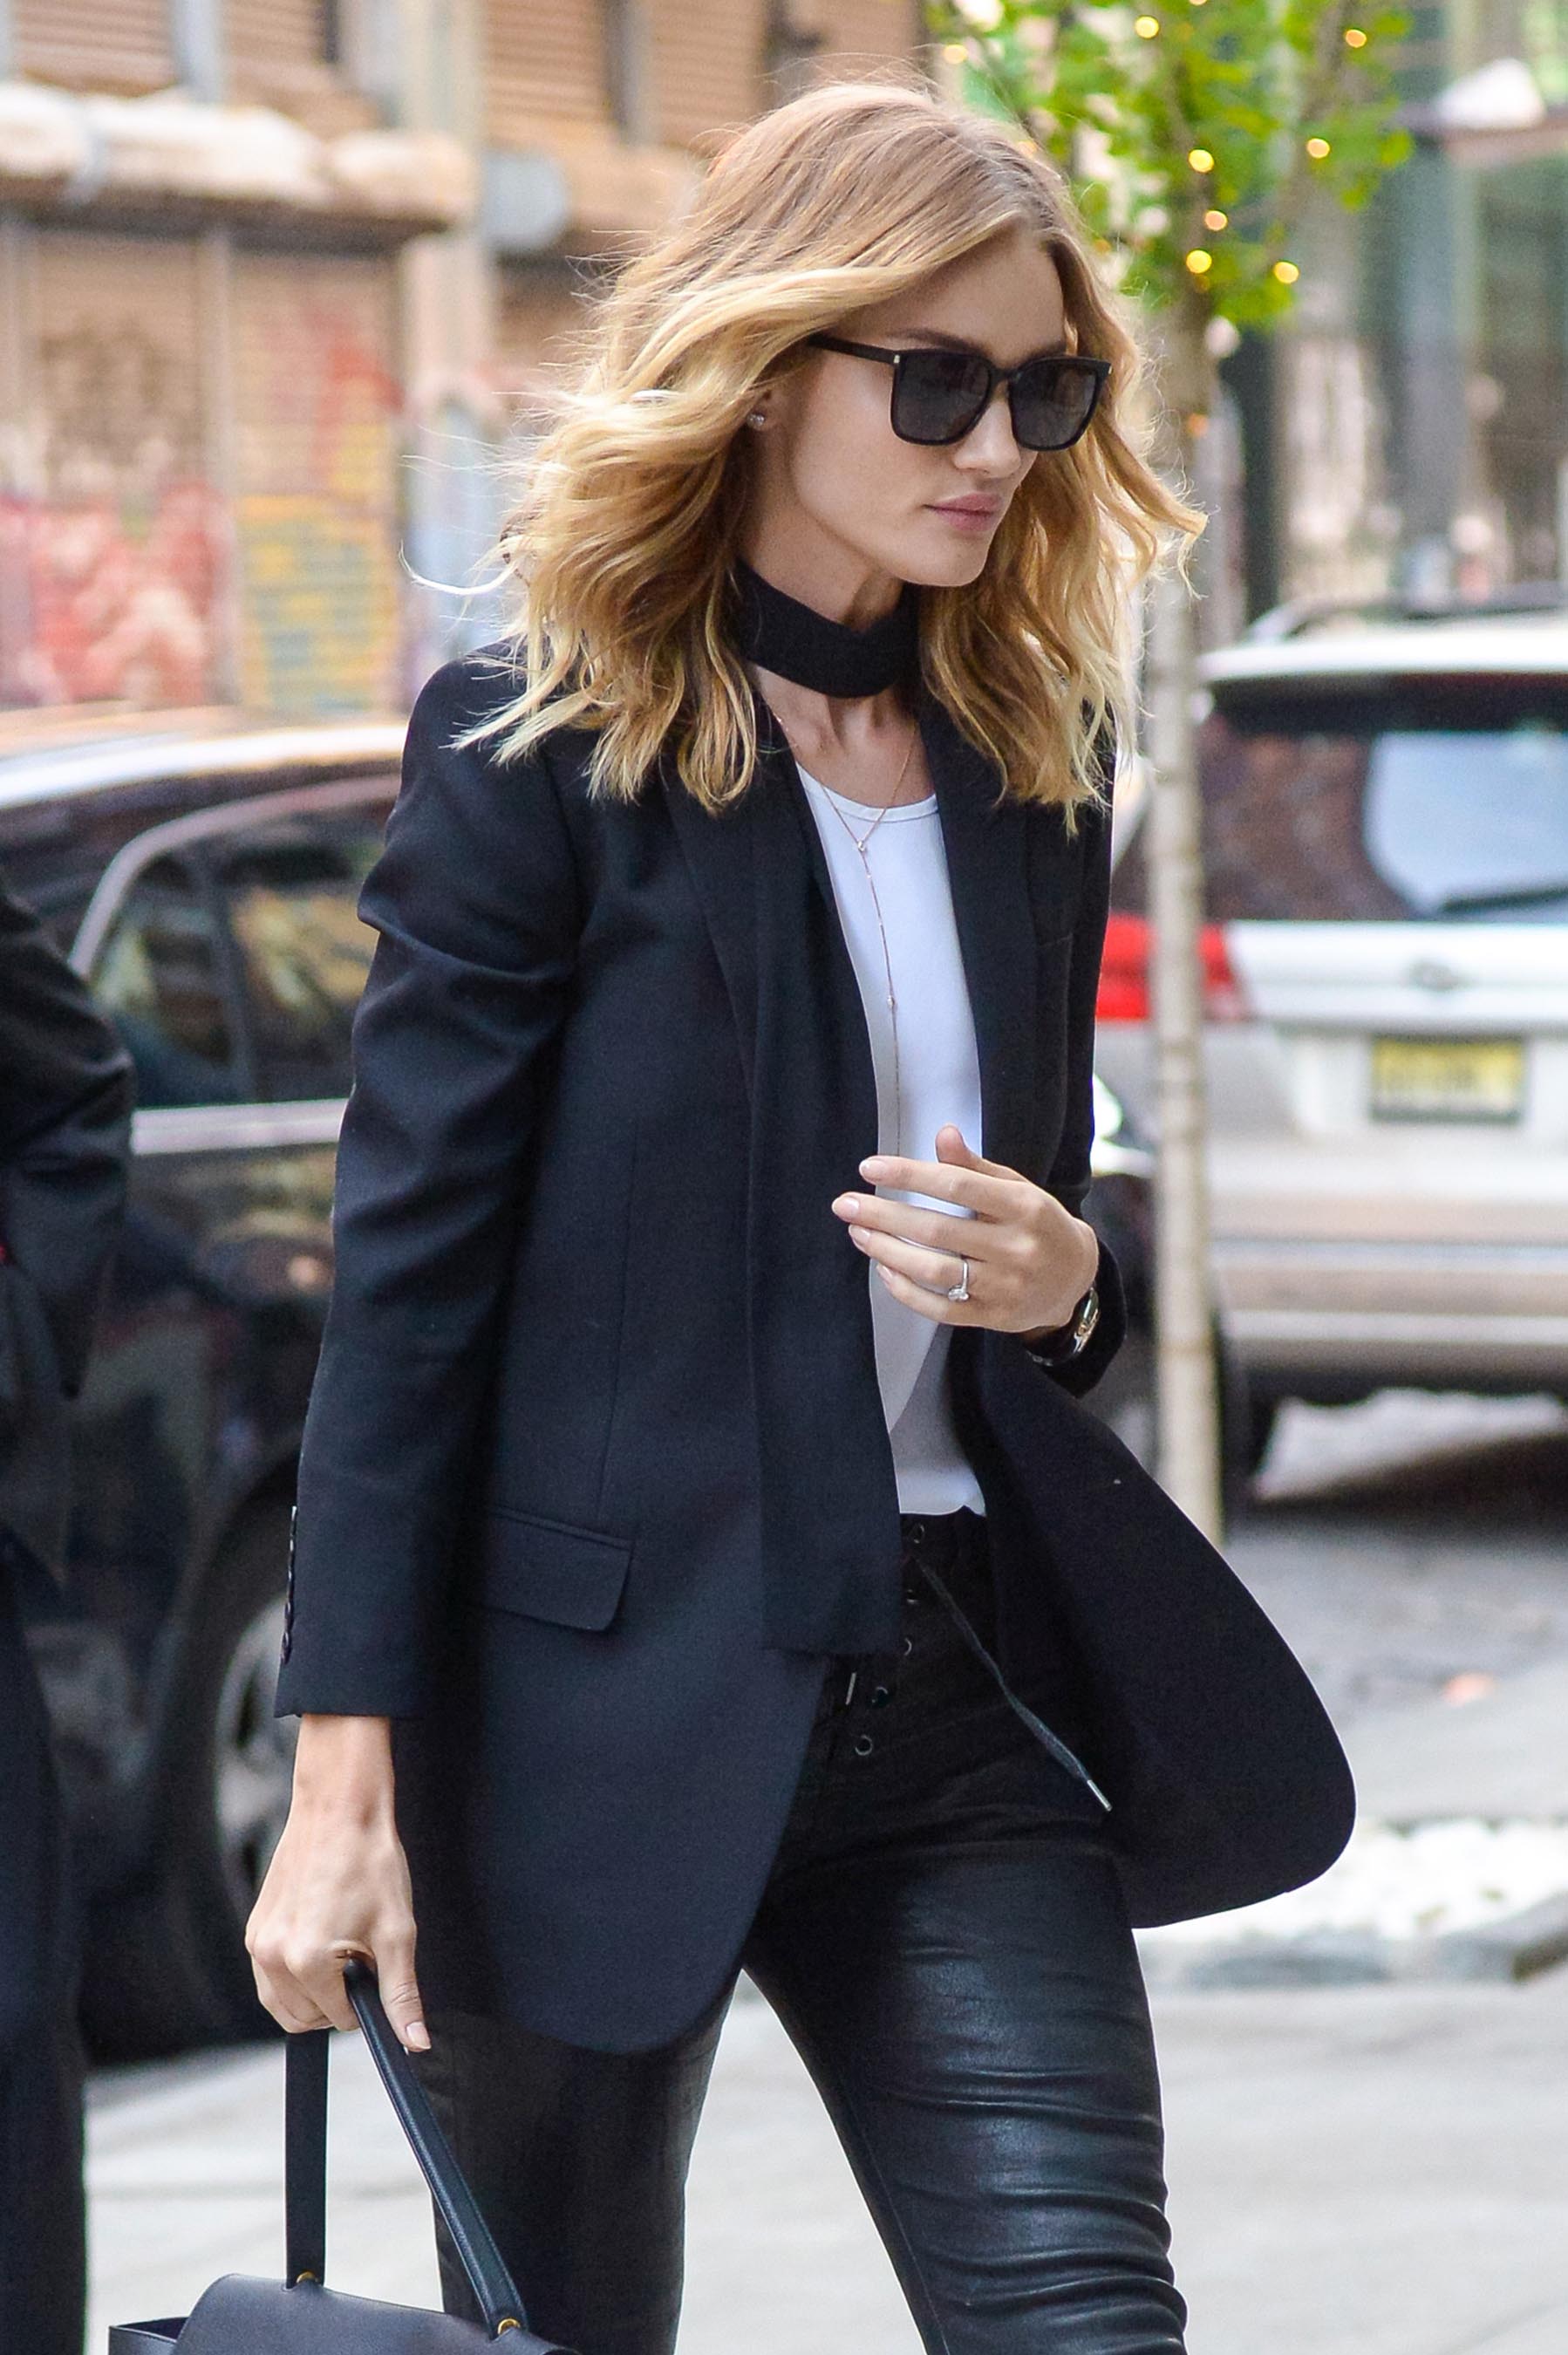 Rosie Huntington-Whiteley out in NYC